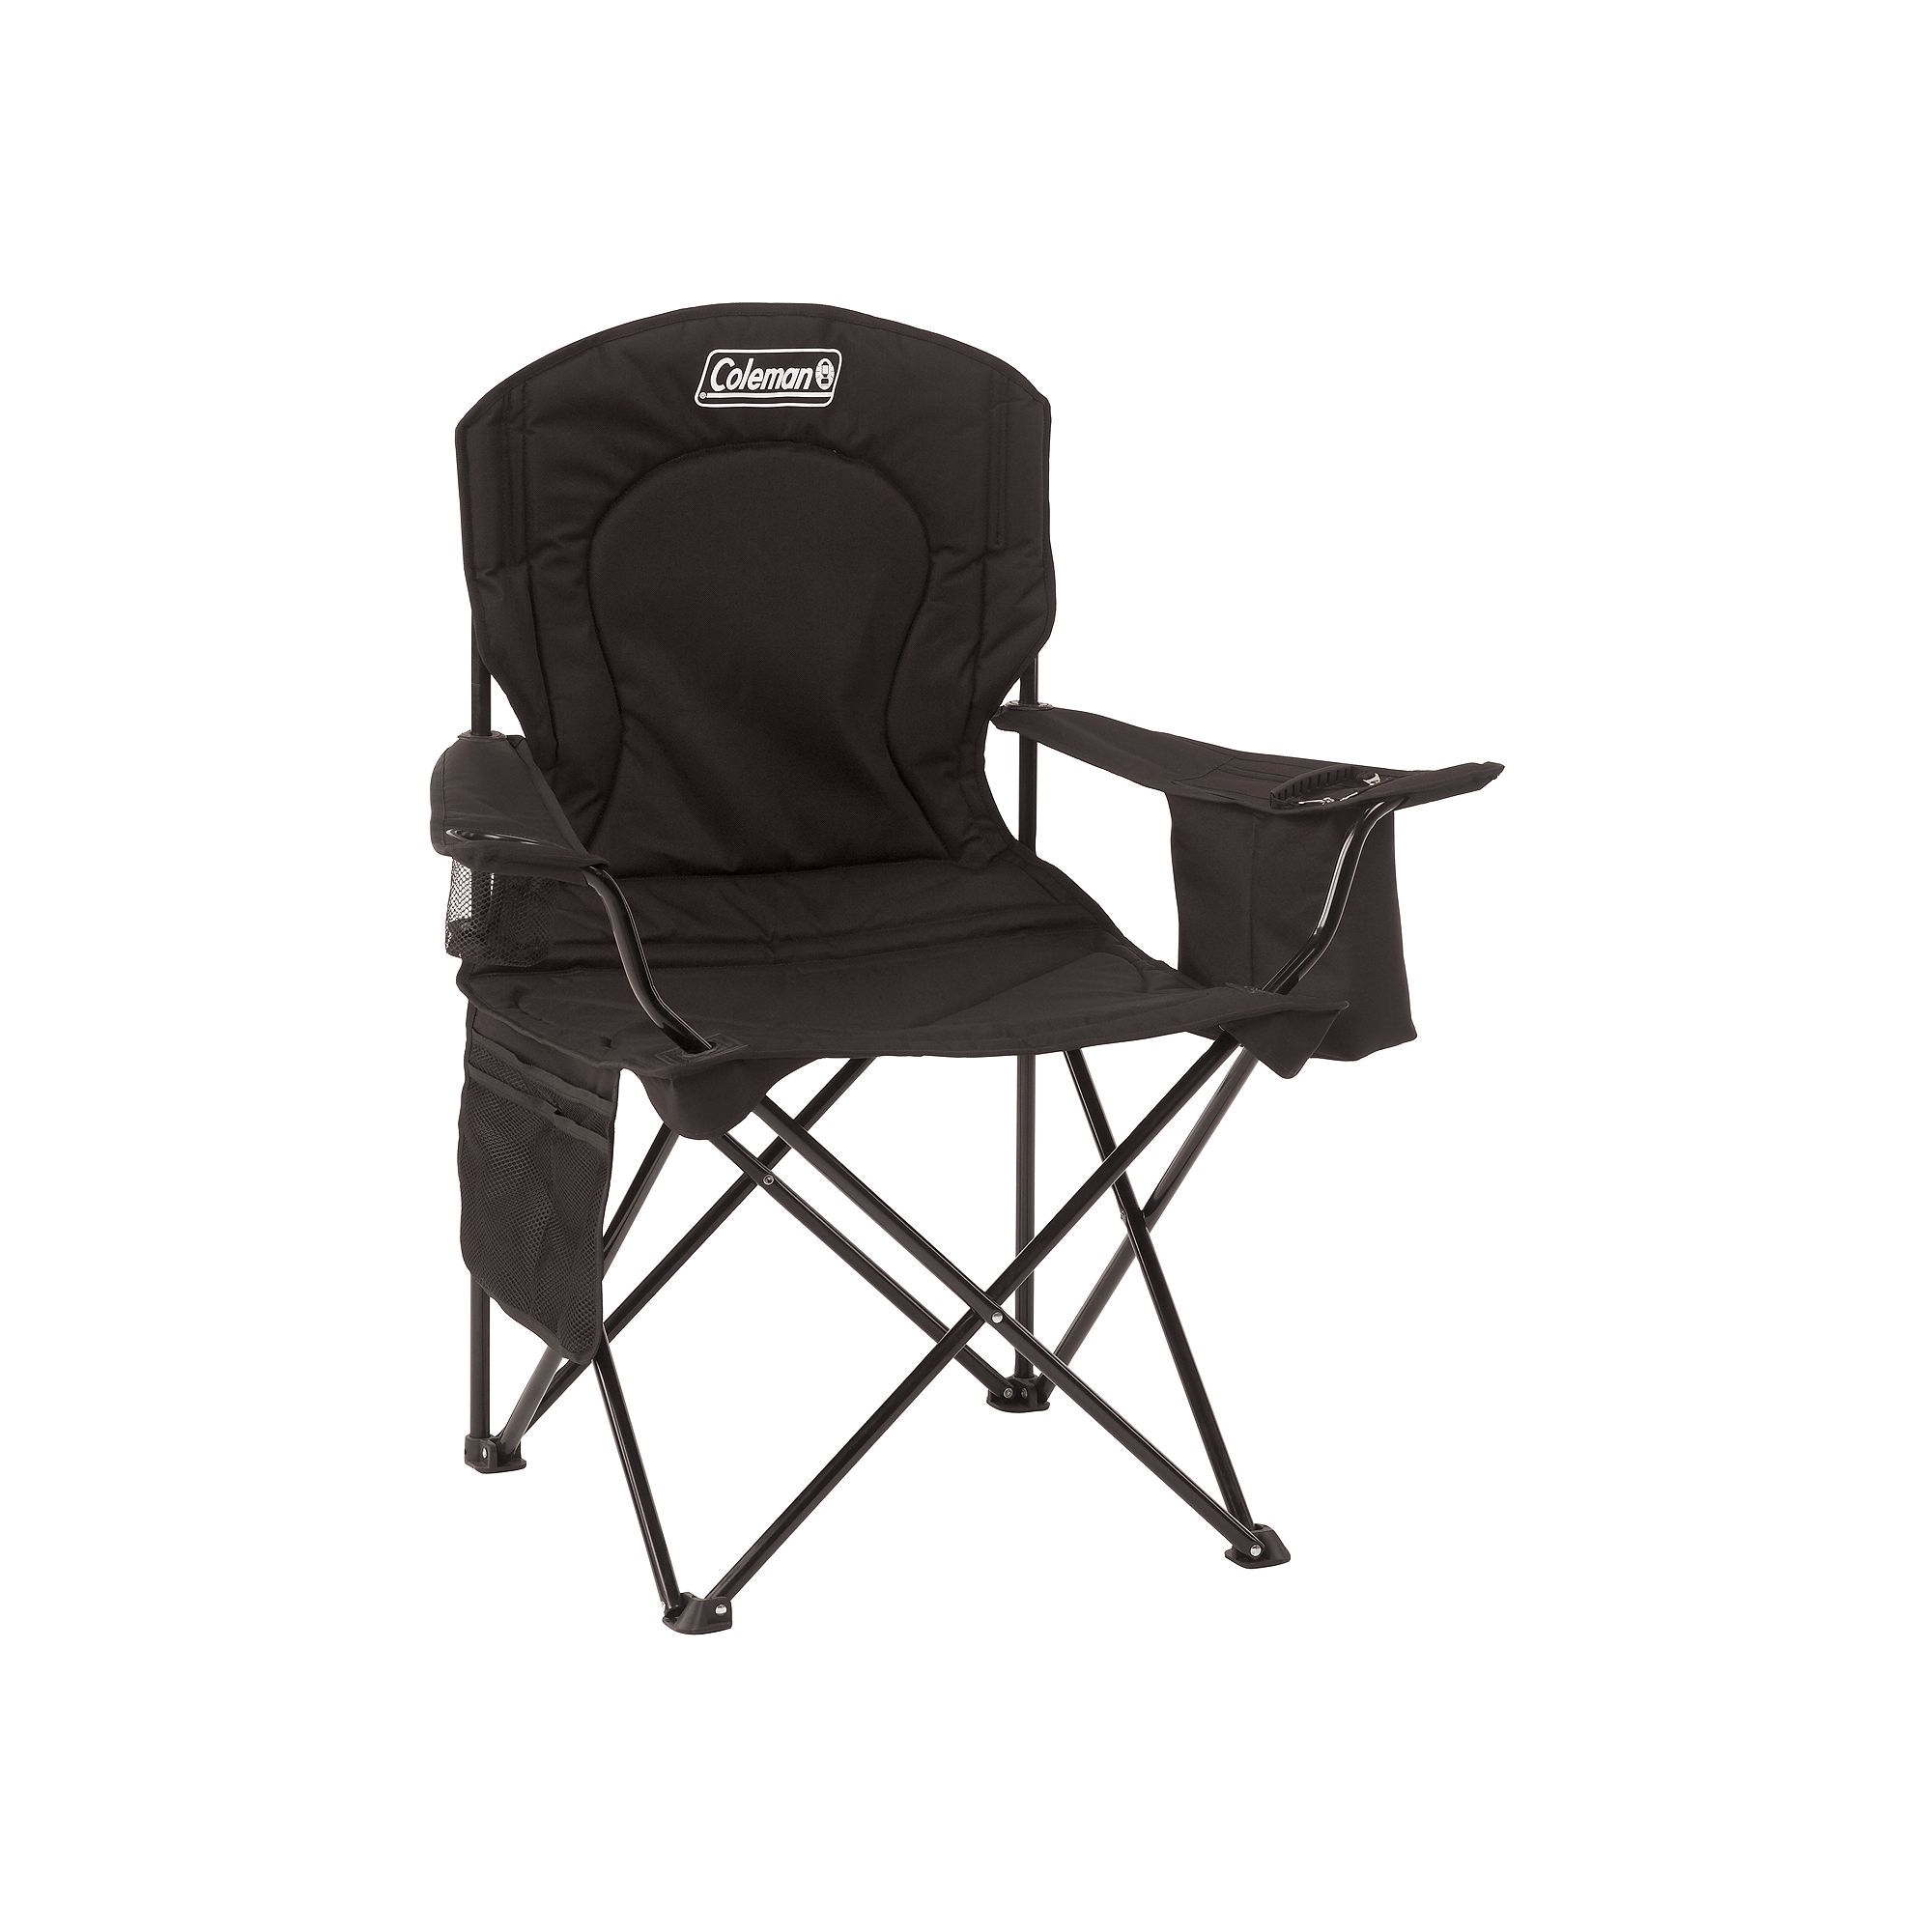 Good Sturdy Camping Chair Outdoor Coleman Oversize Quad Chair with Cooler Red Products